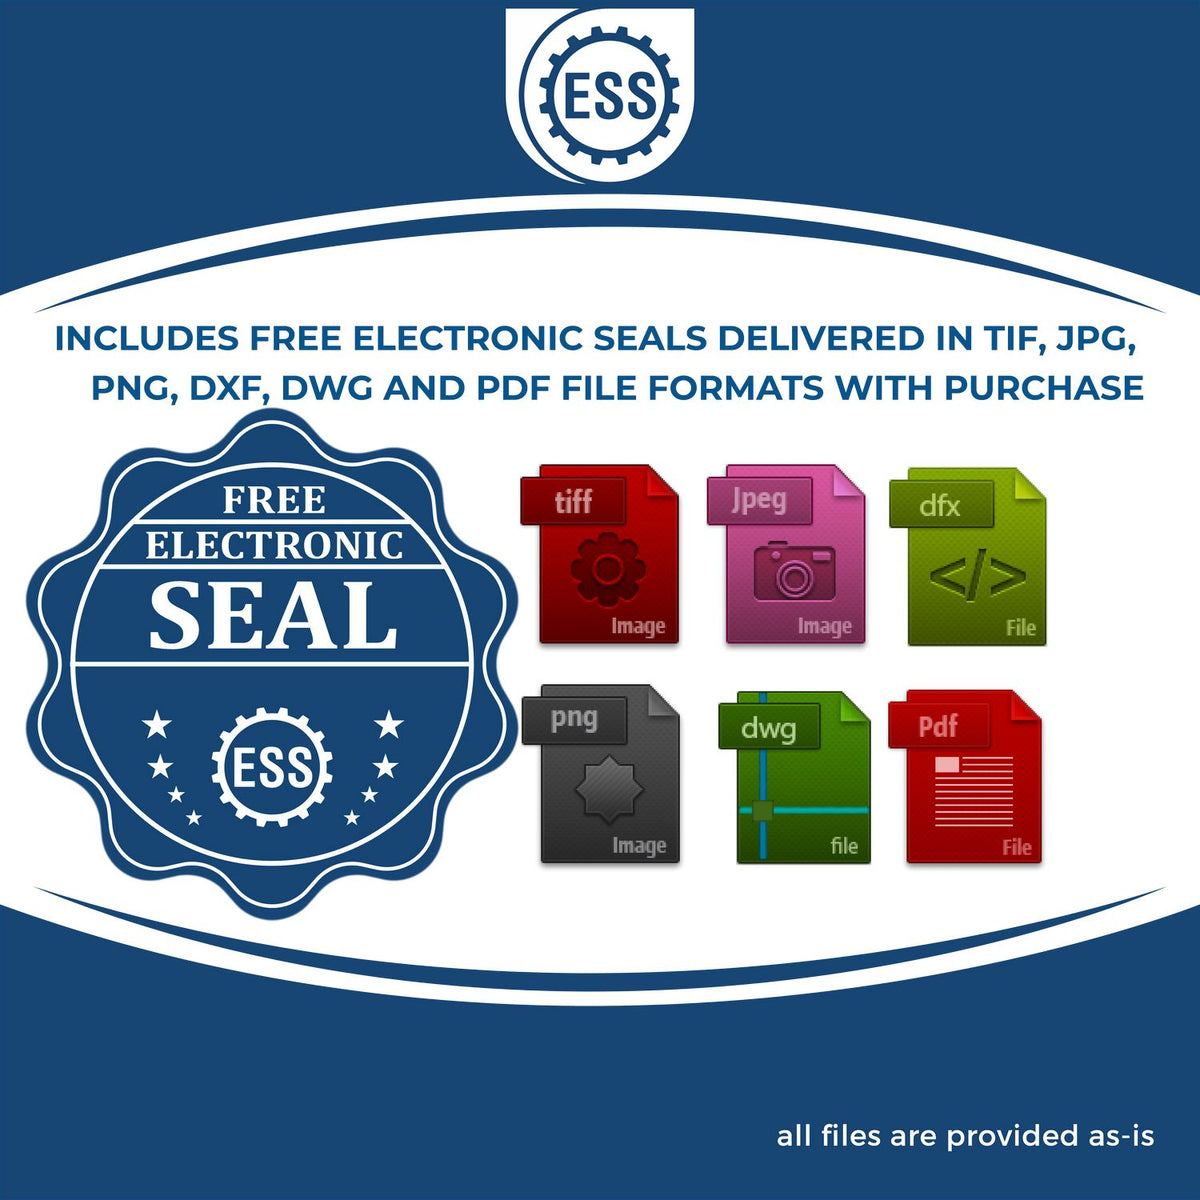 An infographic for the free electronic seal for the Slim Pre-Inked Rhode Island Land Surveyor Seal Stamp illustrating the different file type icons such as DXF, DWG, TIF, JPG and PNG.